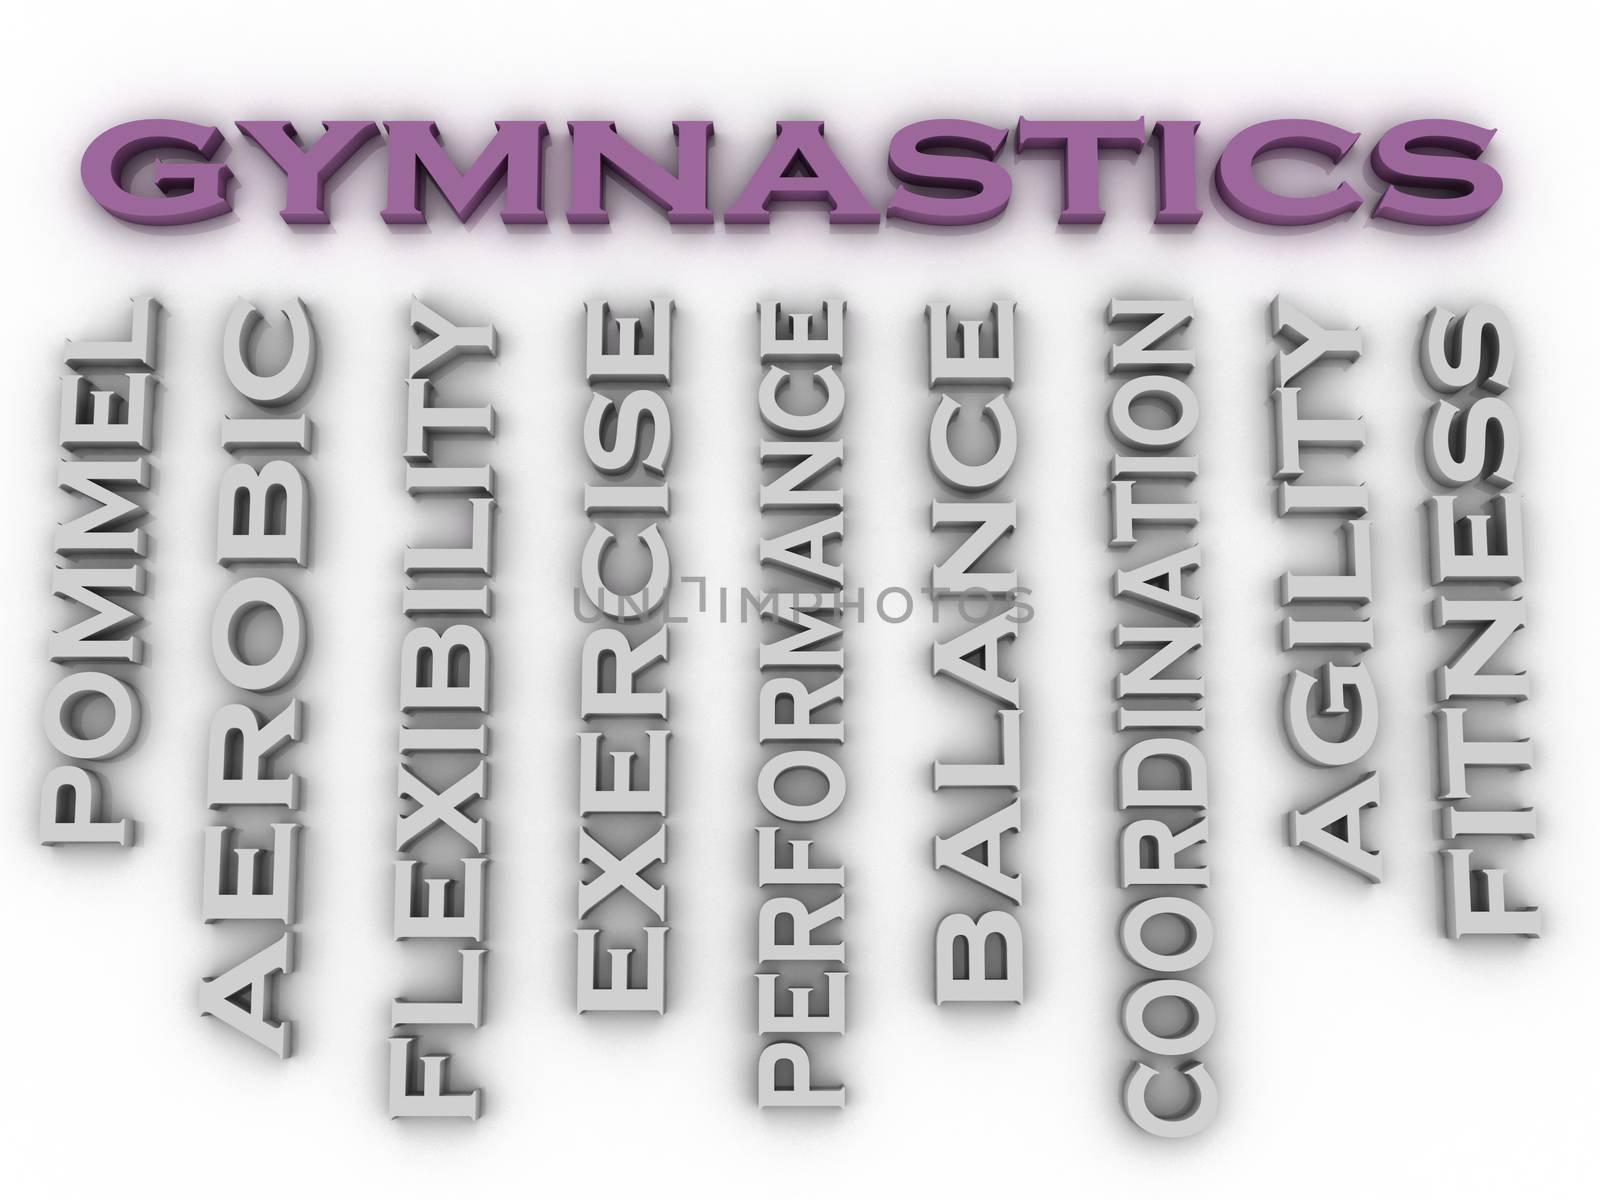 3d image Gymnastics issues concept word cloud background